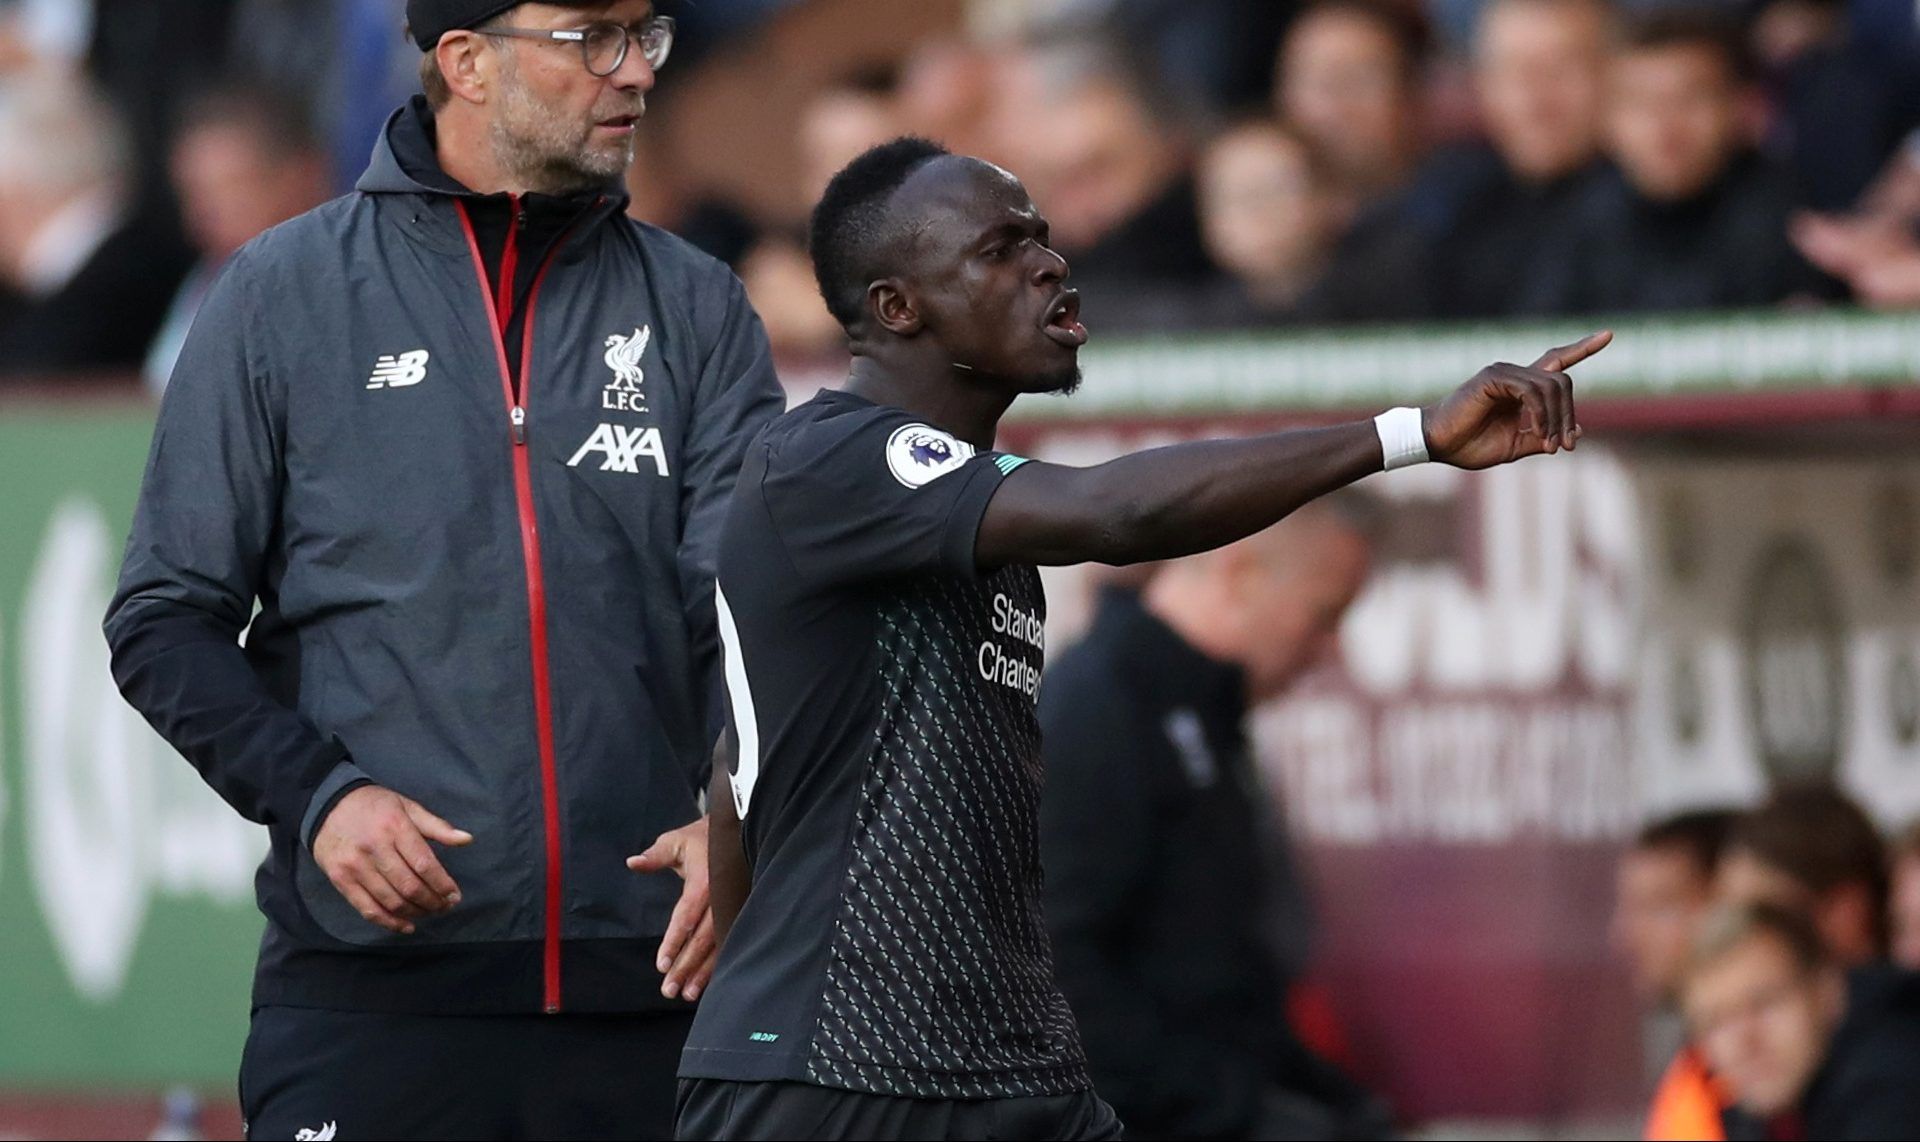 Soccer Football - Premier League - Burnley v Liverpool - Turf Moor, Burnley, Britain - August 31, 2019  Liverpool's Sadio Mane reacts after being substituted off as manager Juergen Klopp looks on  Action Images via Reuters/Carl Recine  EDITORIAL USE ONLY. No use with unauthorized audio, video, data, fixture lists, club/league logos or 